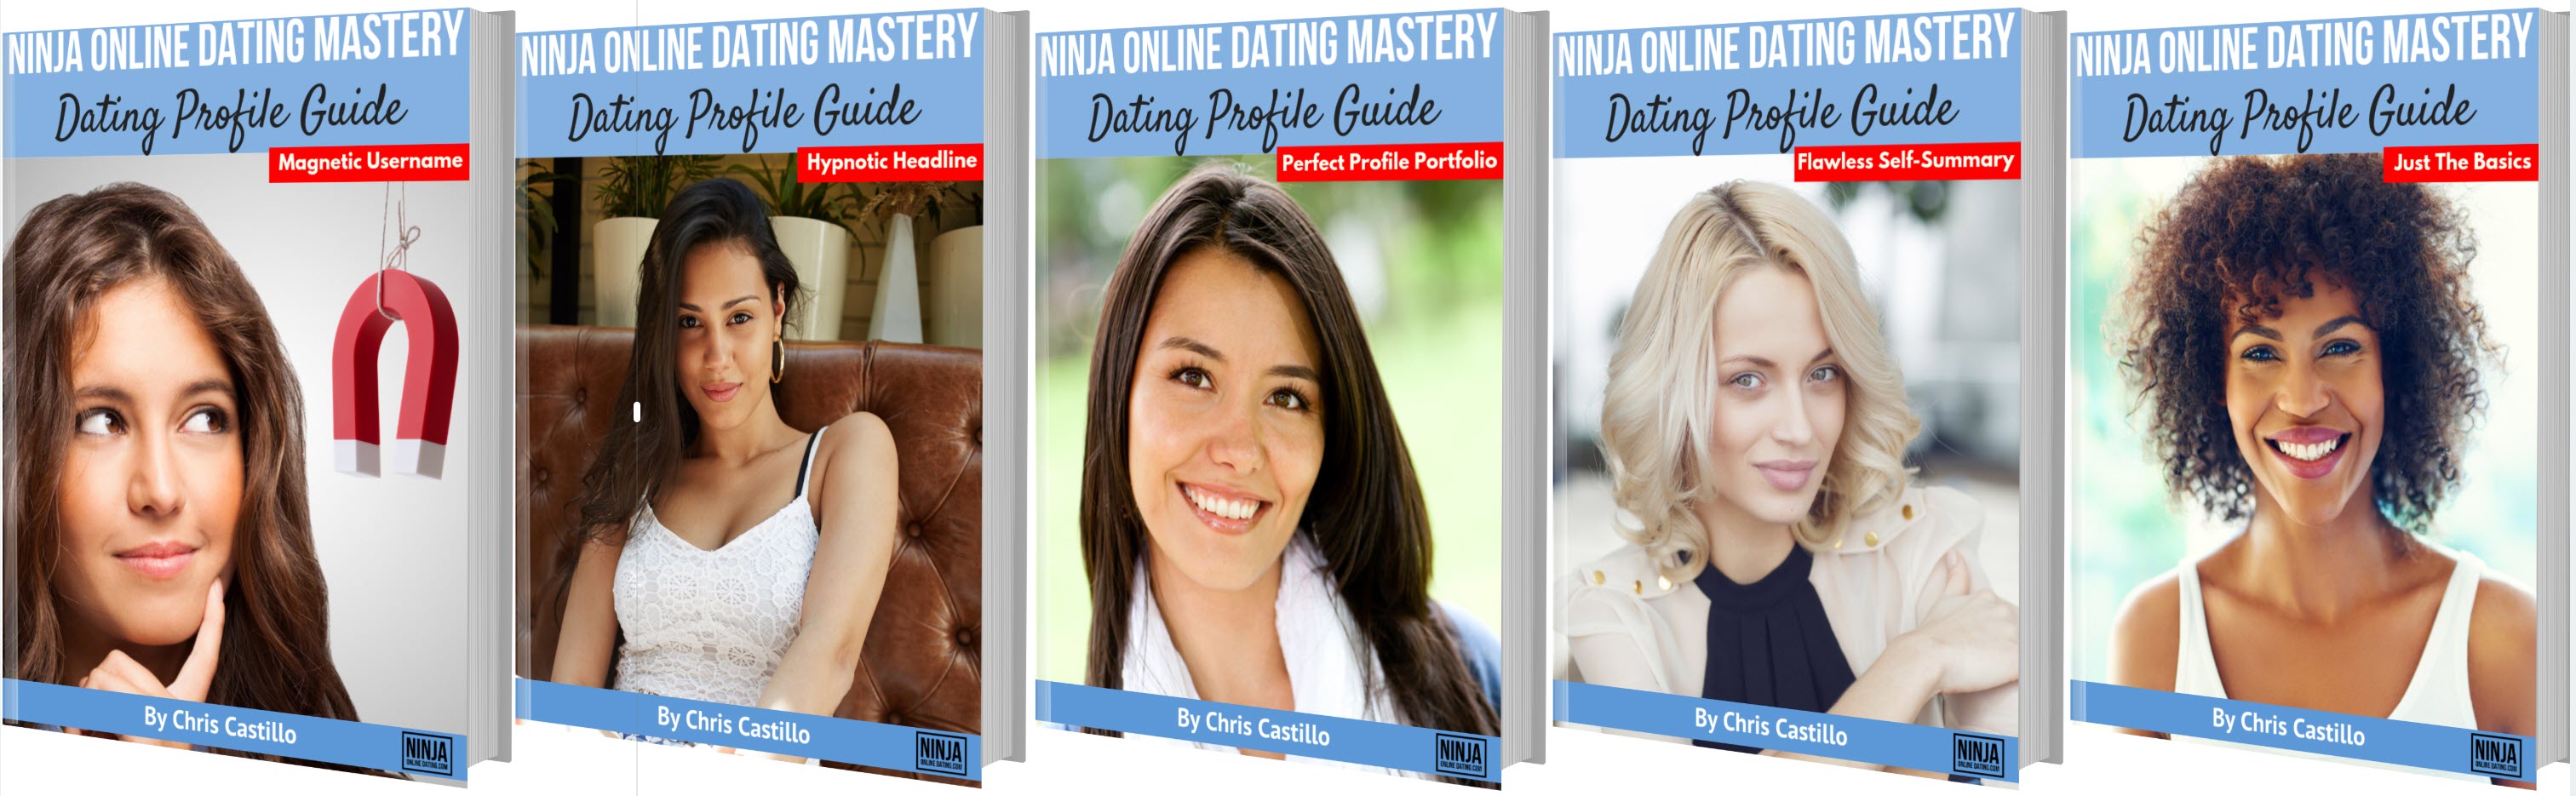 Do's and don'ts for profile pictures on dating sites